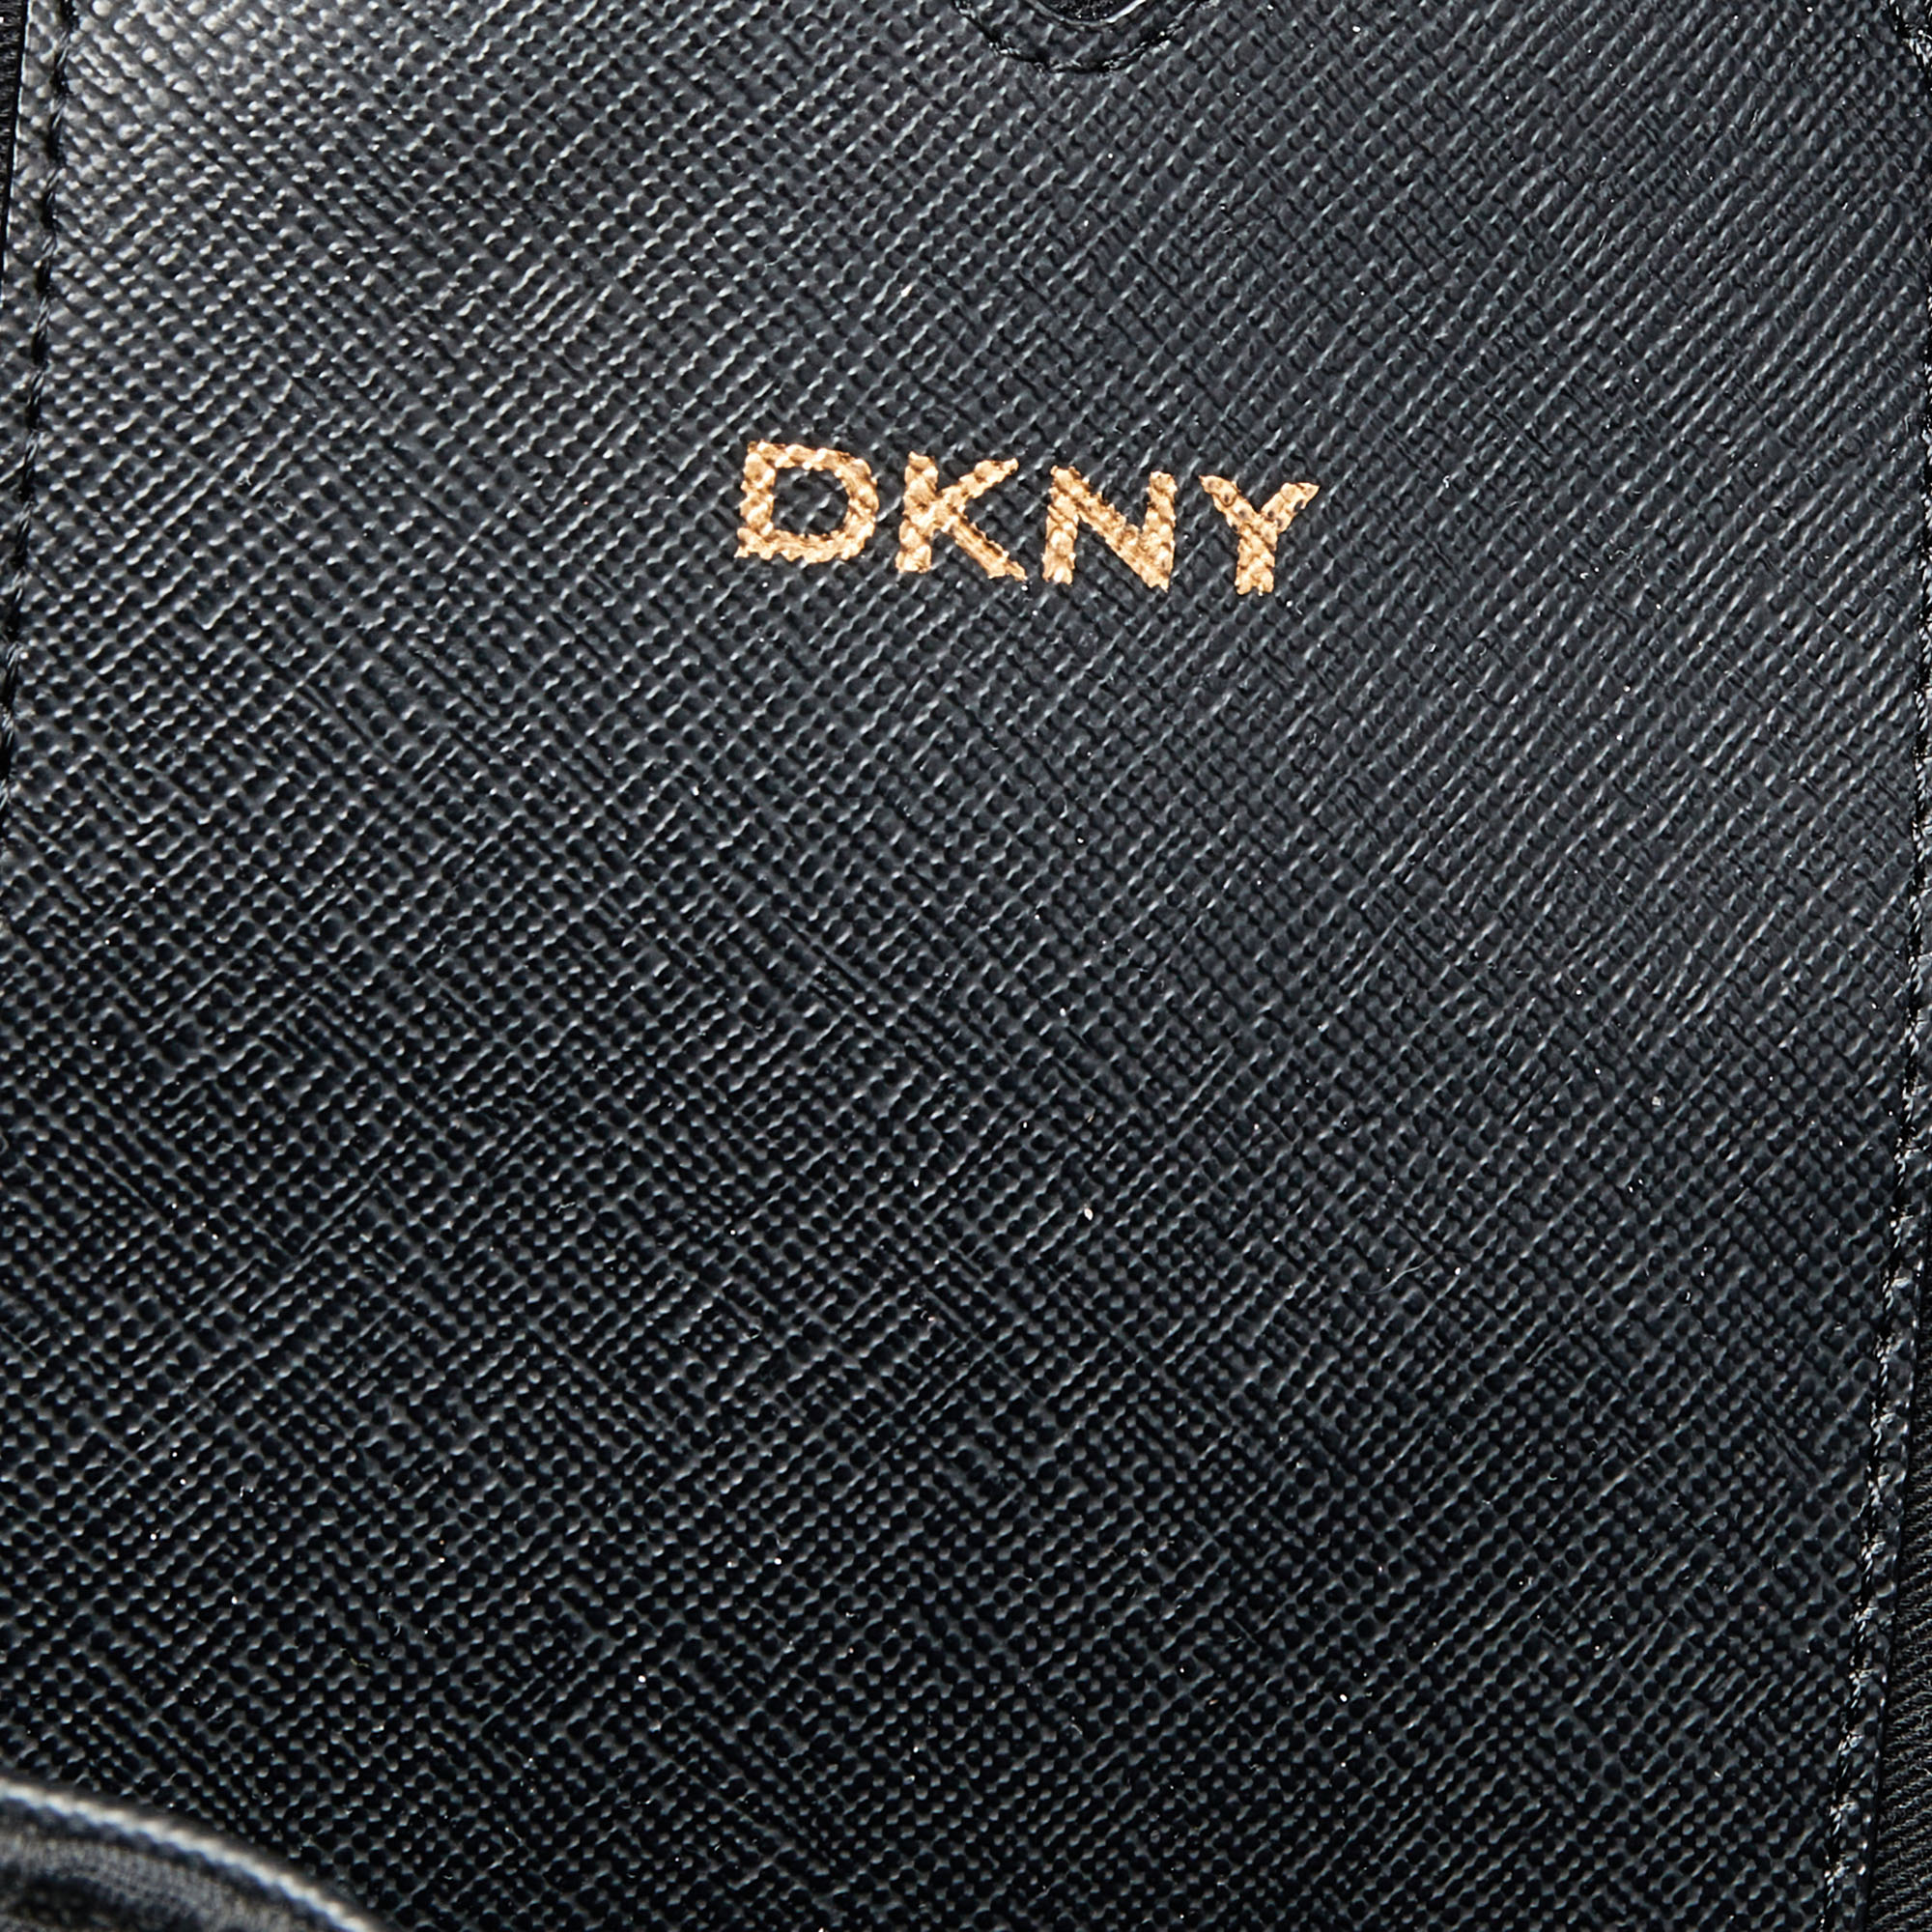 DKNY Black Monogram Canvas And Patent Leather Tote